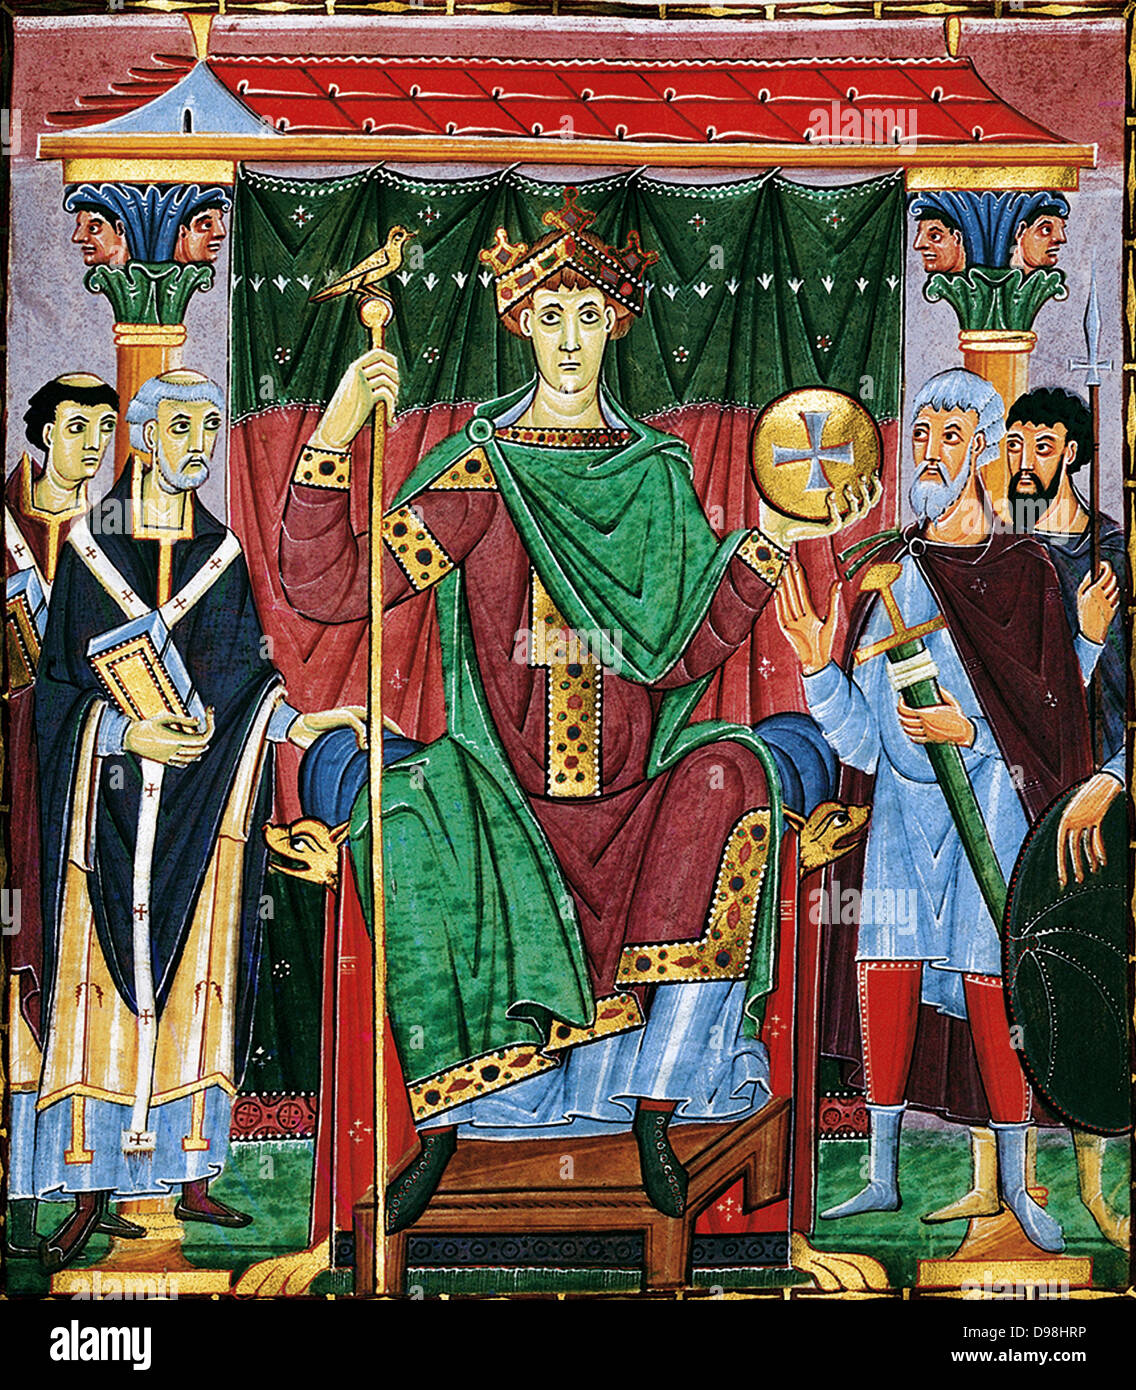 Meister der Reichenauer Schule; Otto III from the Gospels of Otto III. Holy Roman Emperor Reign 21 May 996 – 24 January 1002. Date 1000 AD Stock Photo